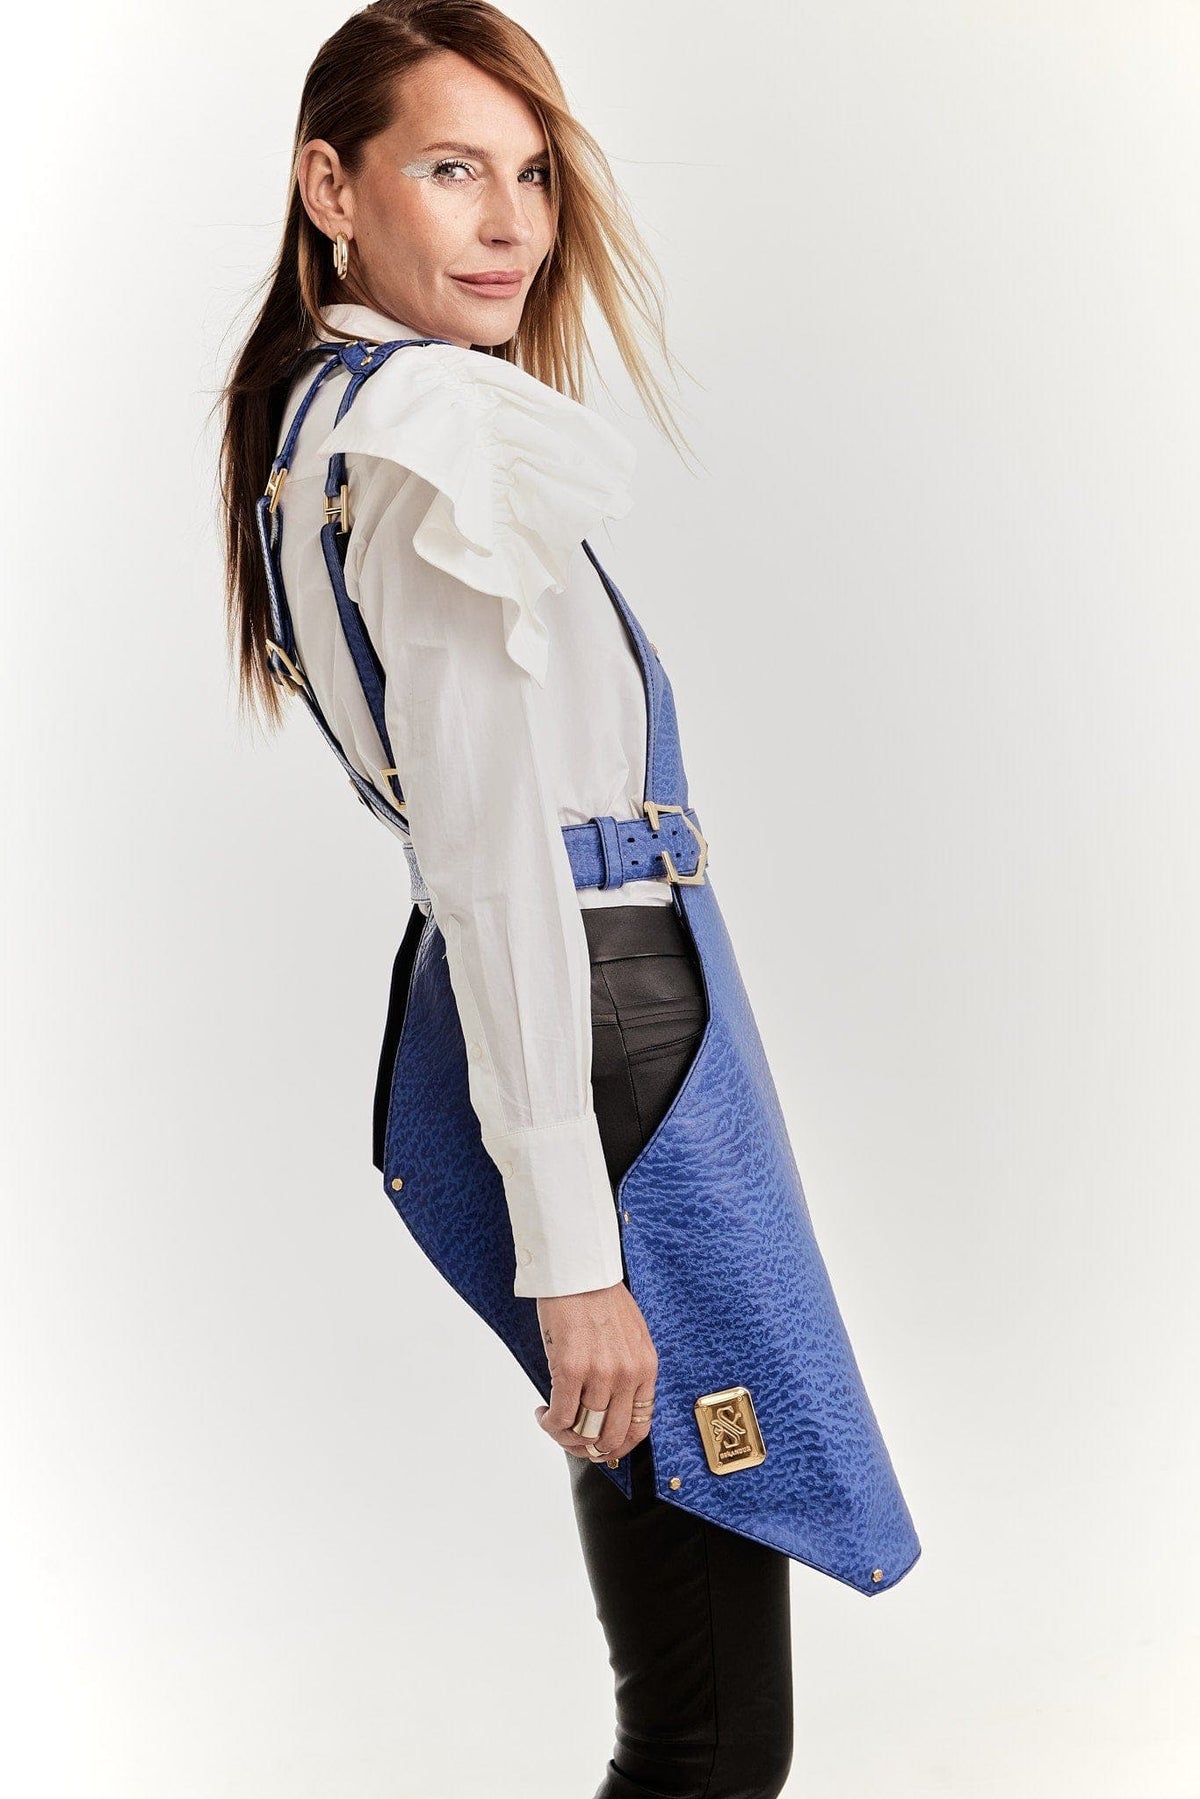 Eskandur women&#39;s blue leather luxury premium apron side view blond haired mannequin with white shirt and gold logo plate